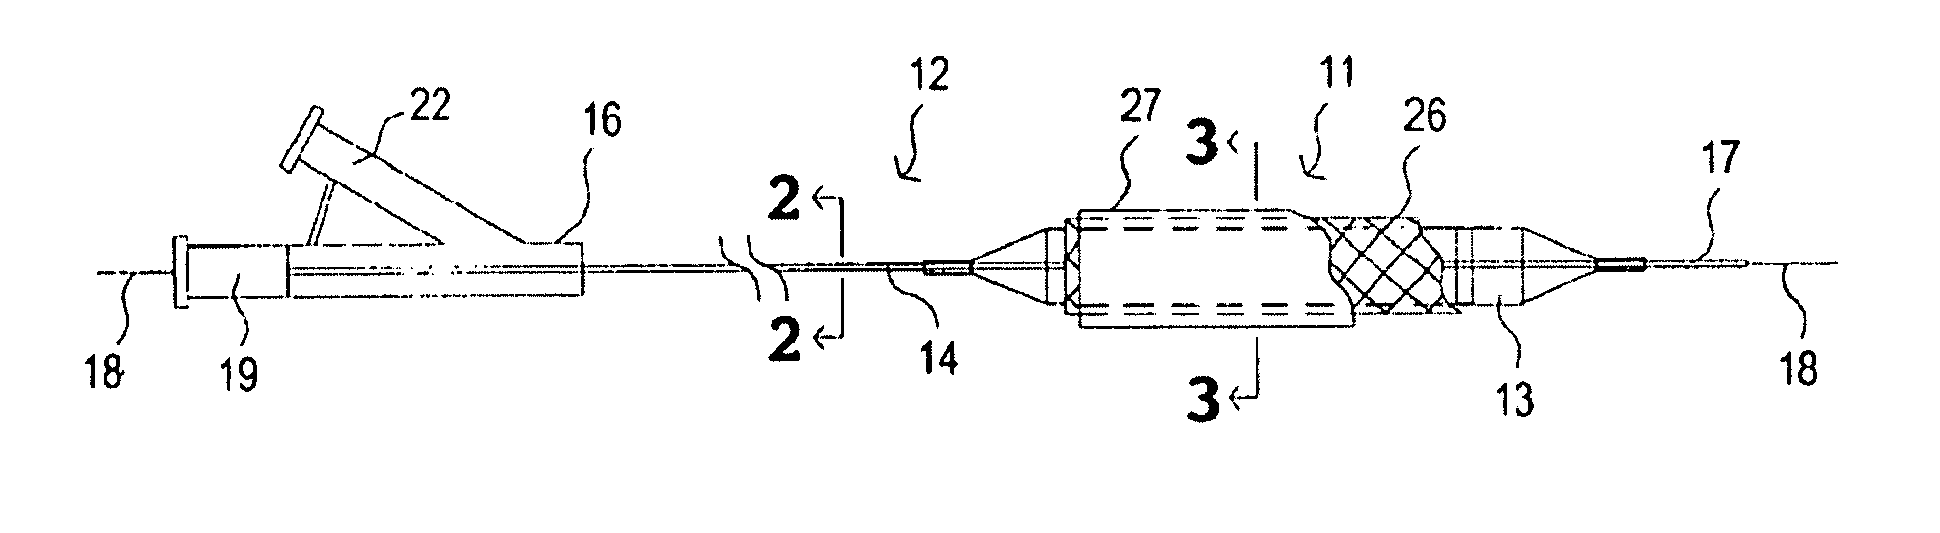 Composite expandable device with impervious polymeric covering and bioactive coating thereon, delivery apparatus and method